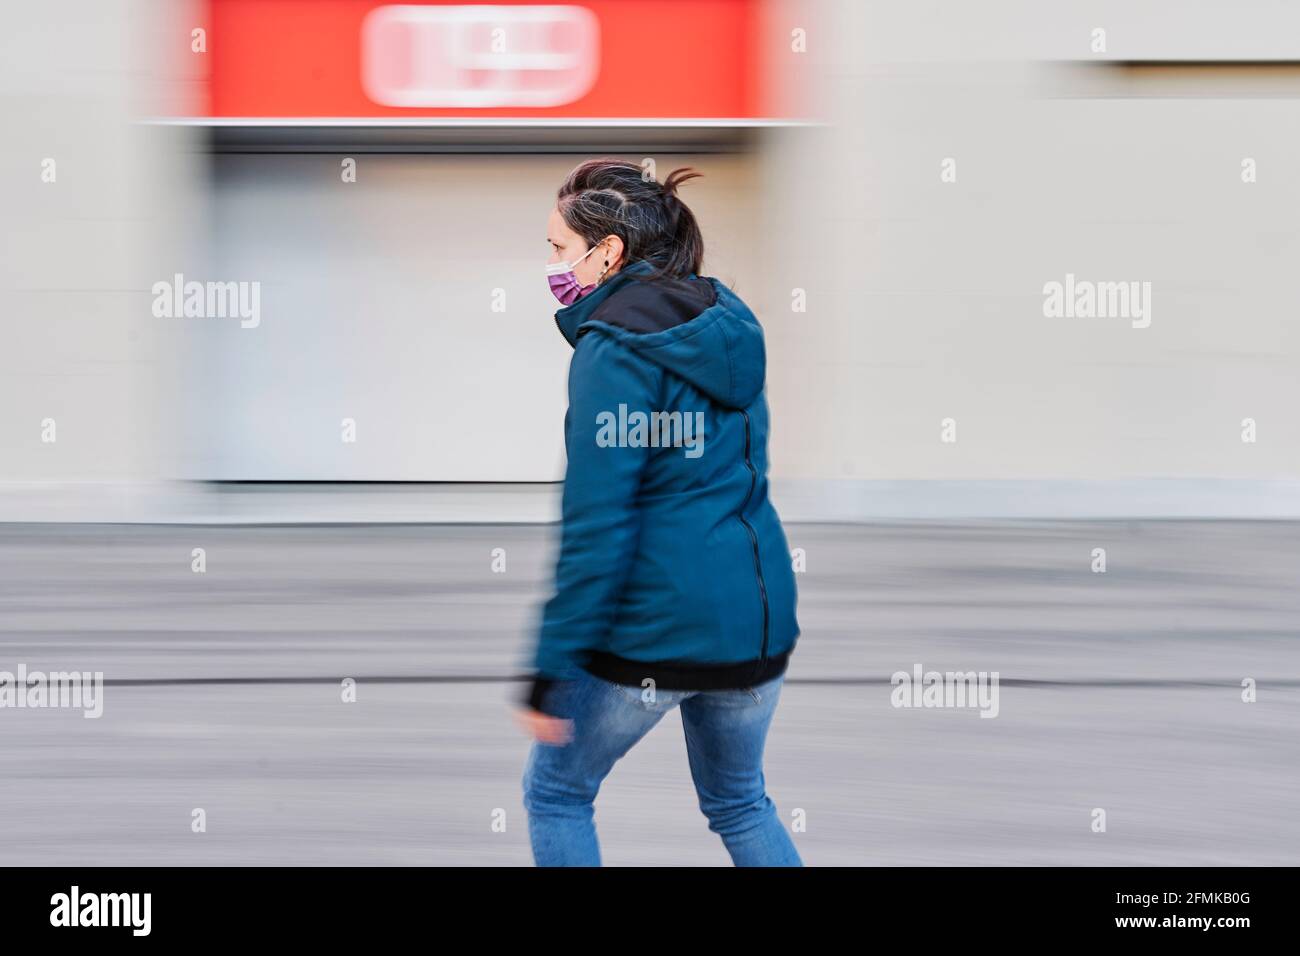 Young girl on skateboard in the city. Photograph taken by means of a panning photographic, with blurred background. Concept of sustainable transportat Stock Photo